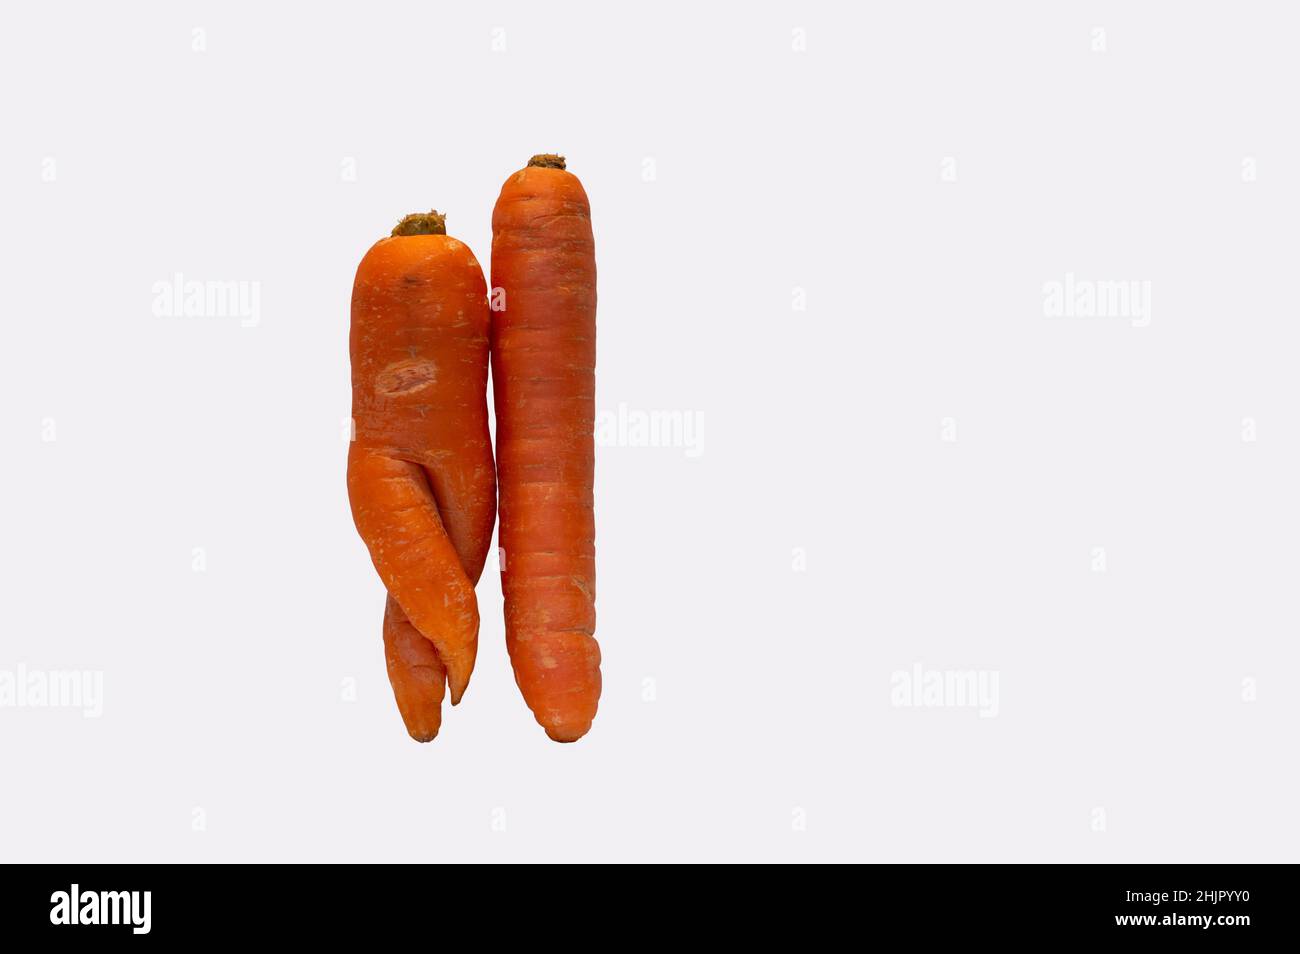 Deformed carrot resembling human body shape next to straight carrot isolated on white Stock Photo